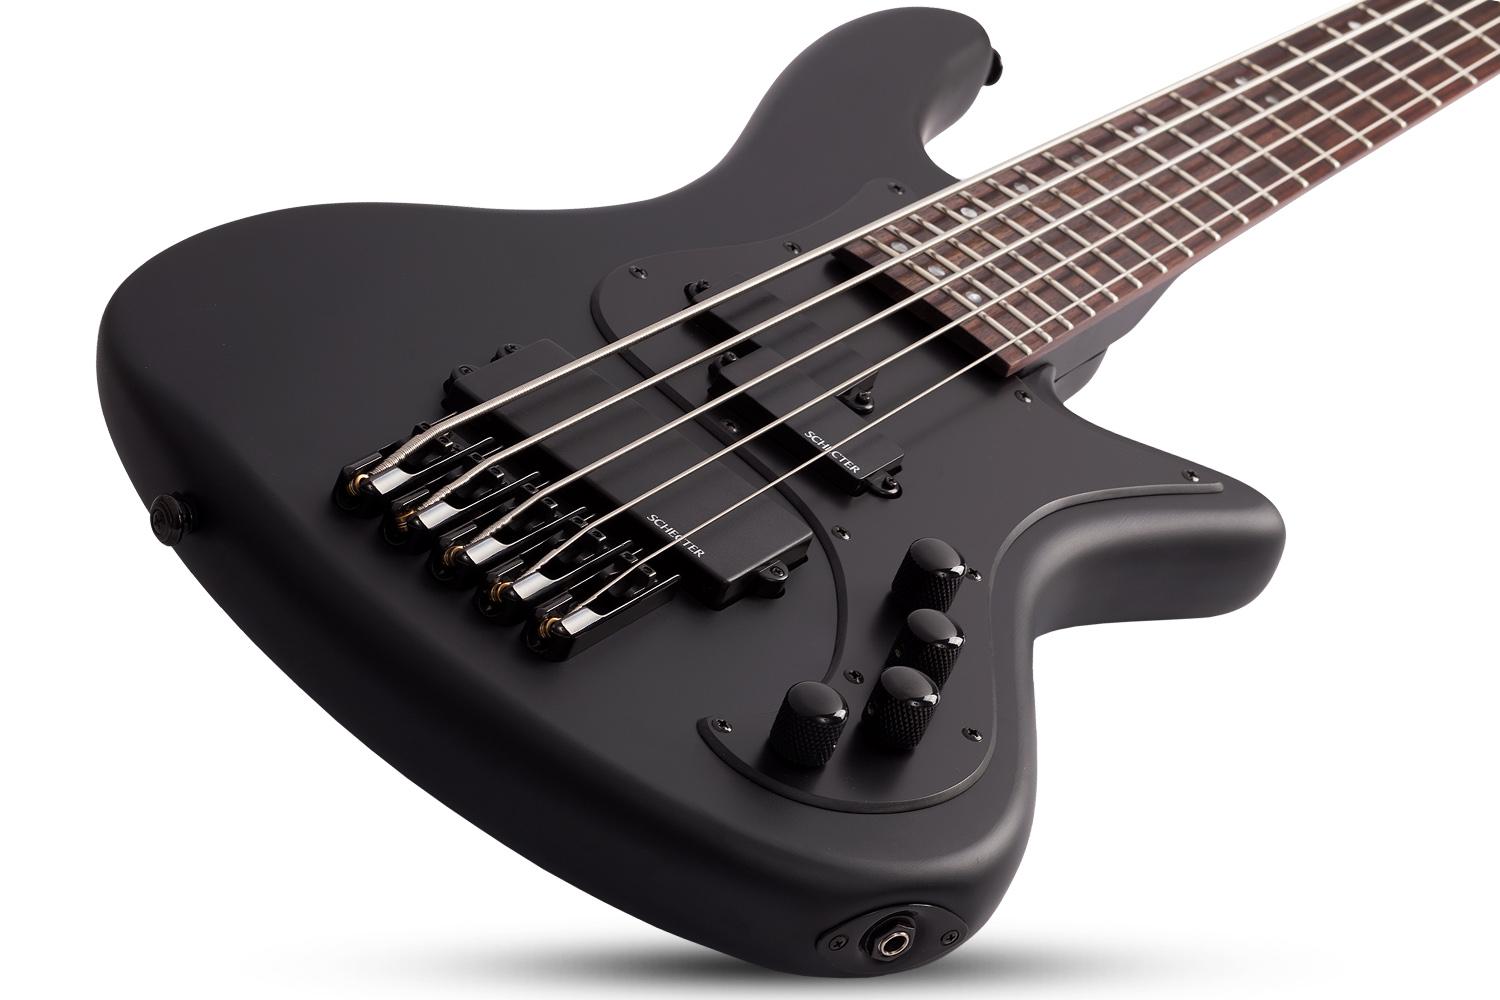 Schecter Stiletto Stealth-5 5c Active Rw - Satin Black - Solid body electric bass - Variation 1